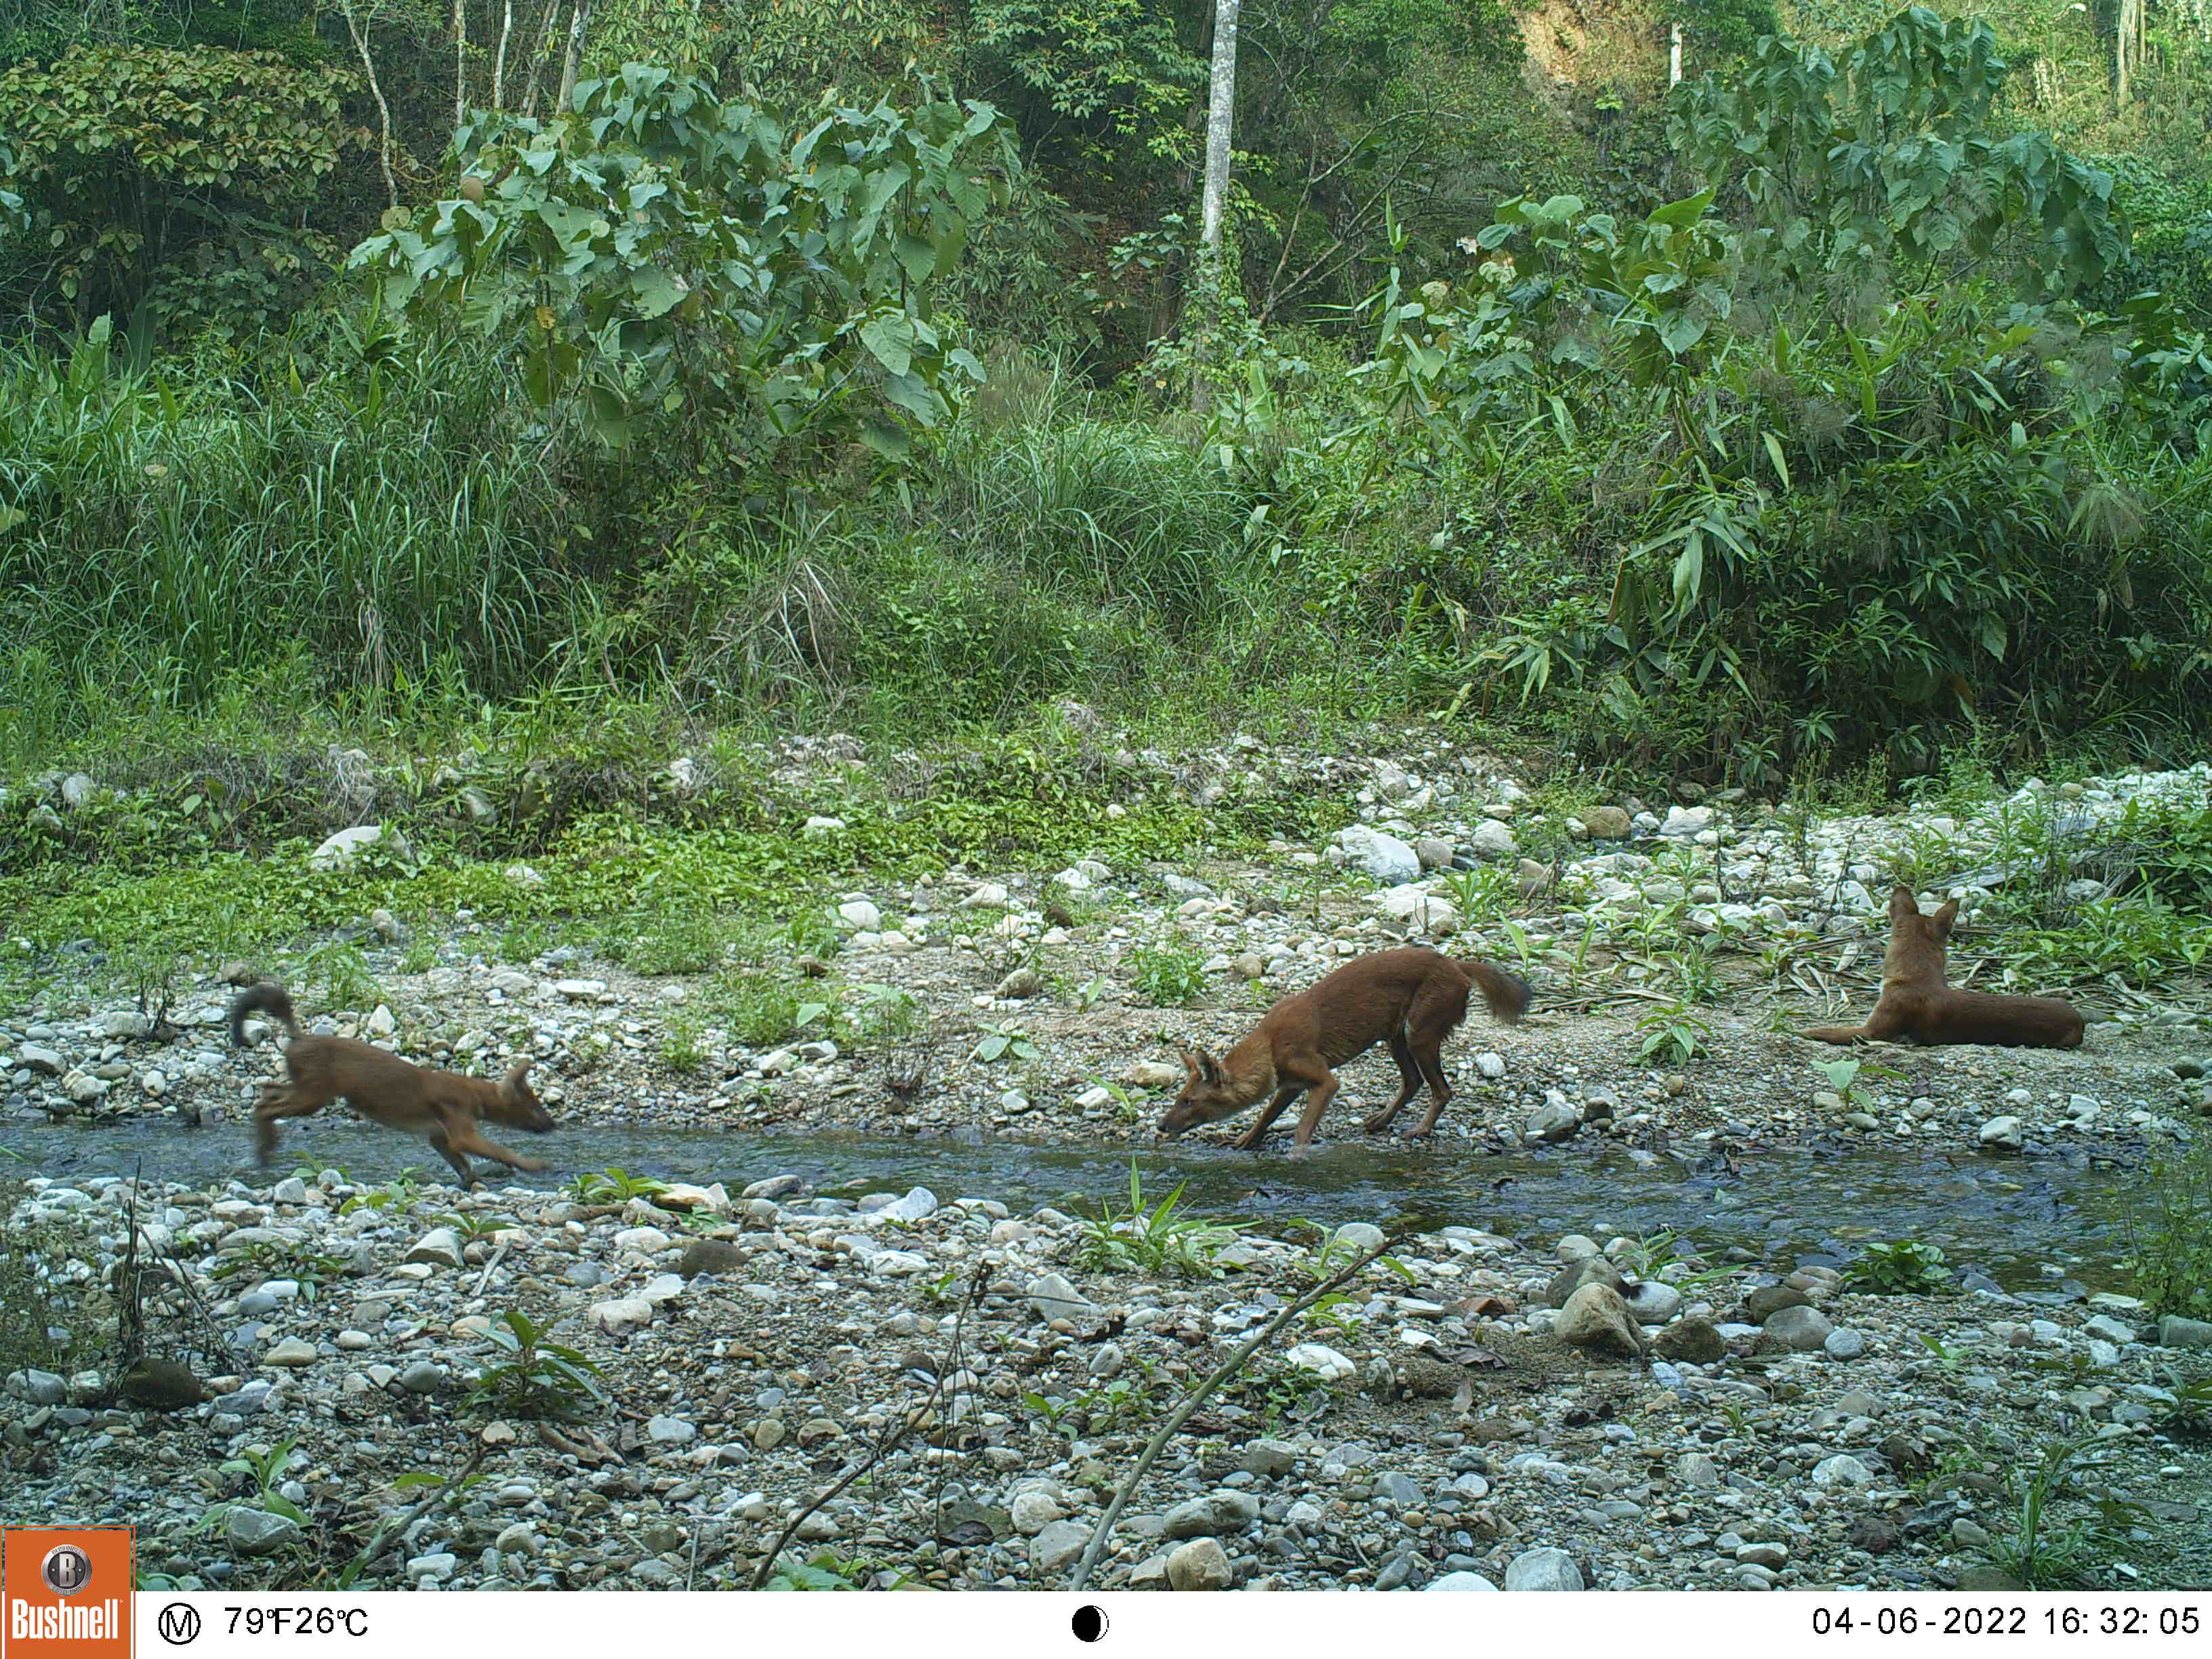 Asian wild dogs or dholes (adult and pups) from a camera trap photo in Nepal